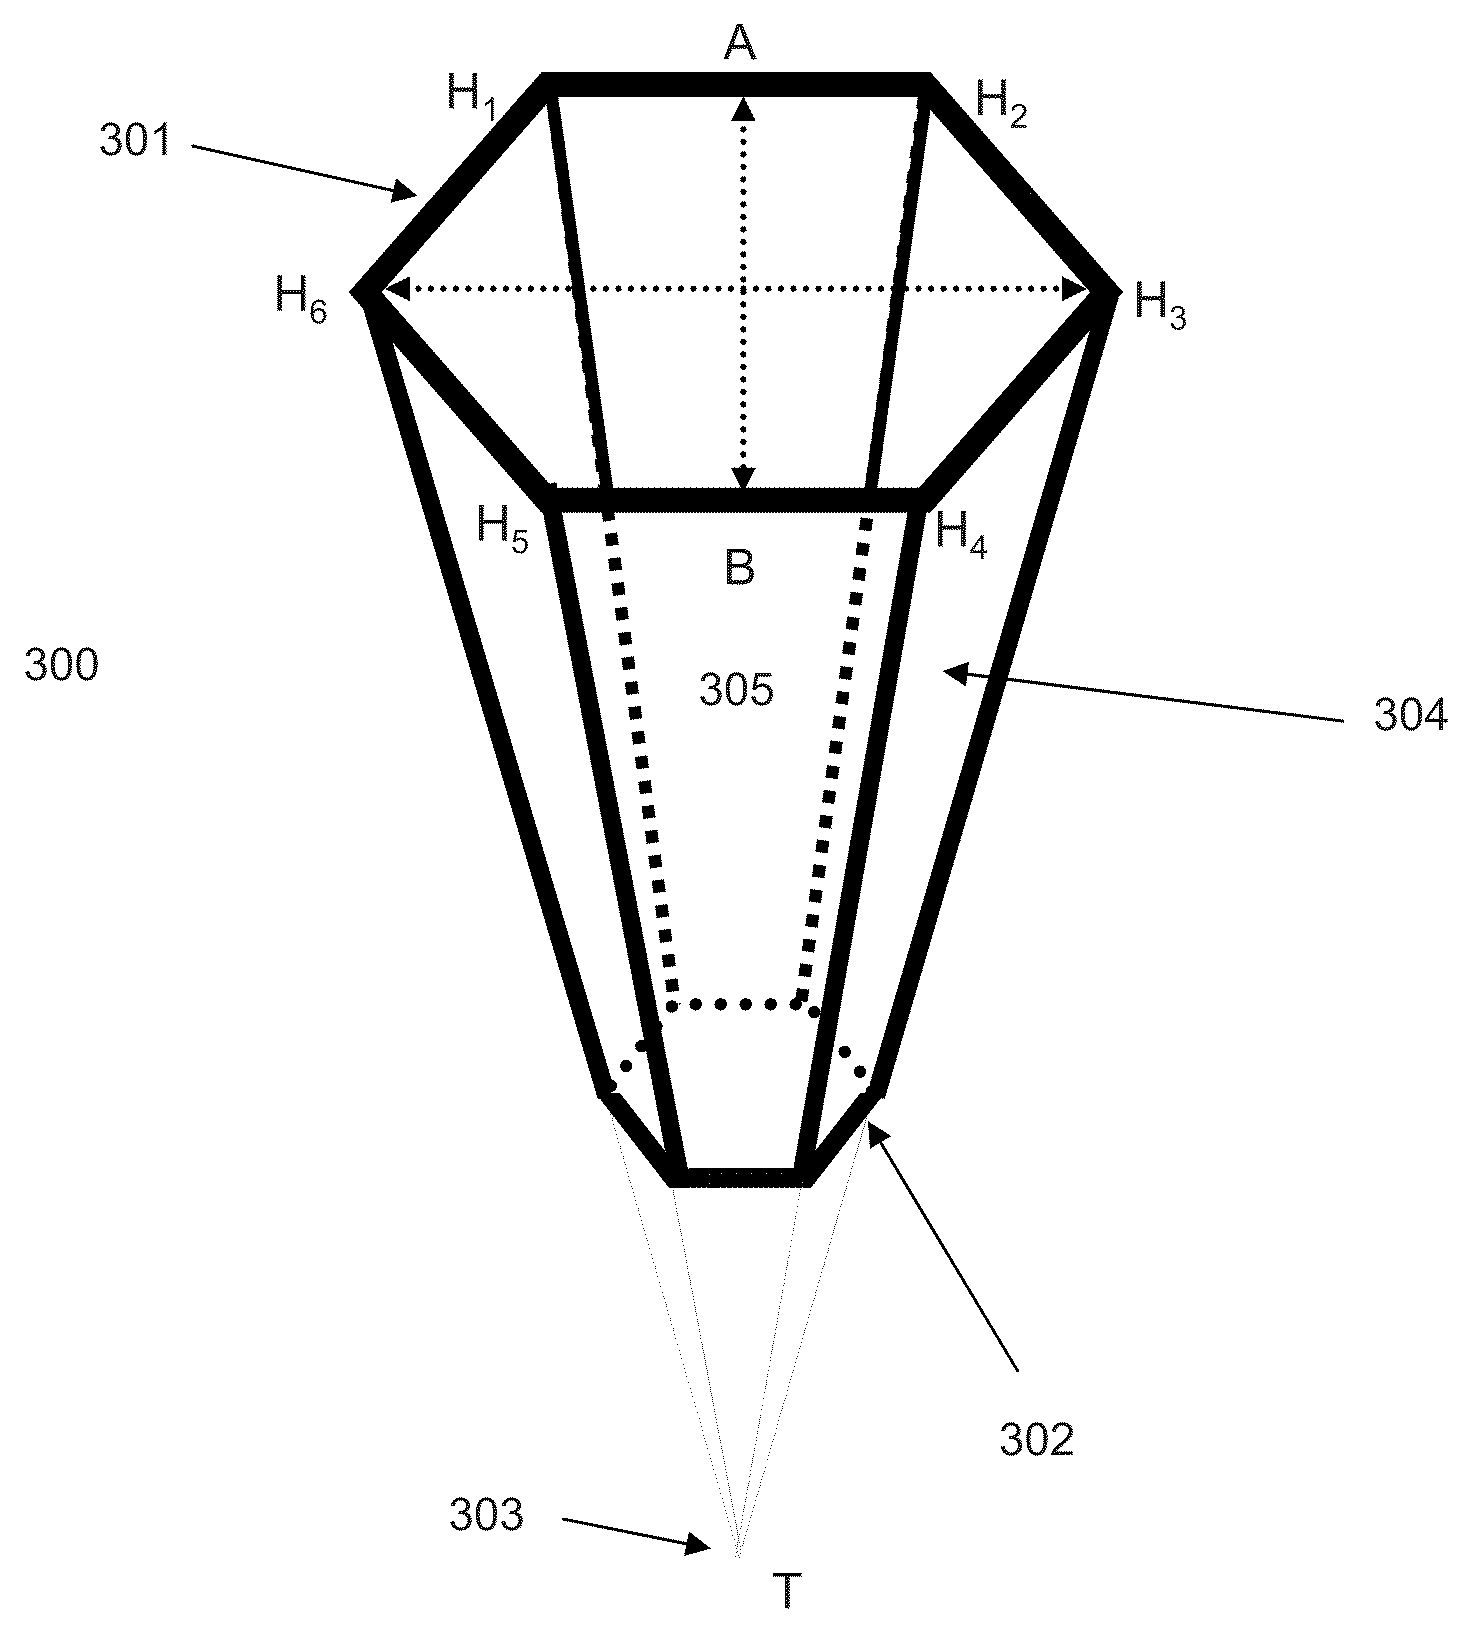 Truncated pyramid structures for see-through solar cells